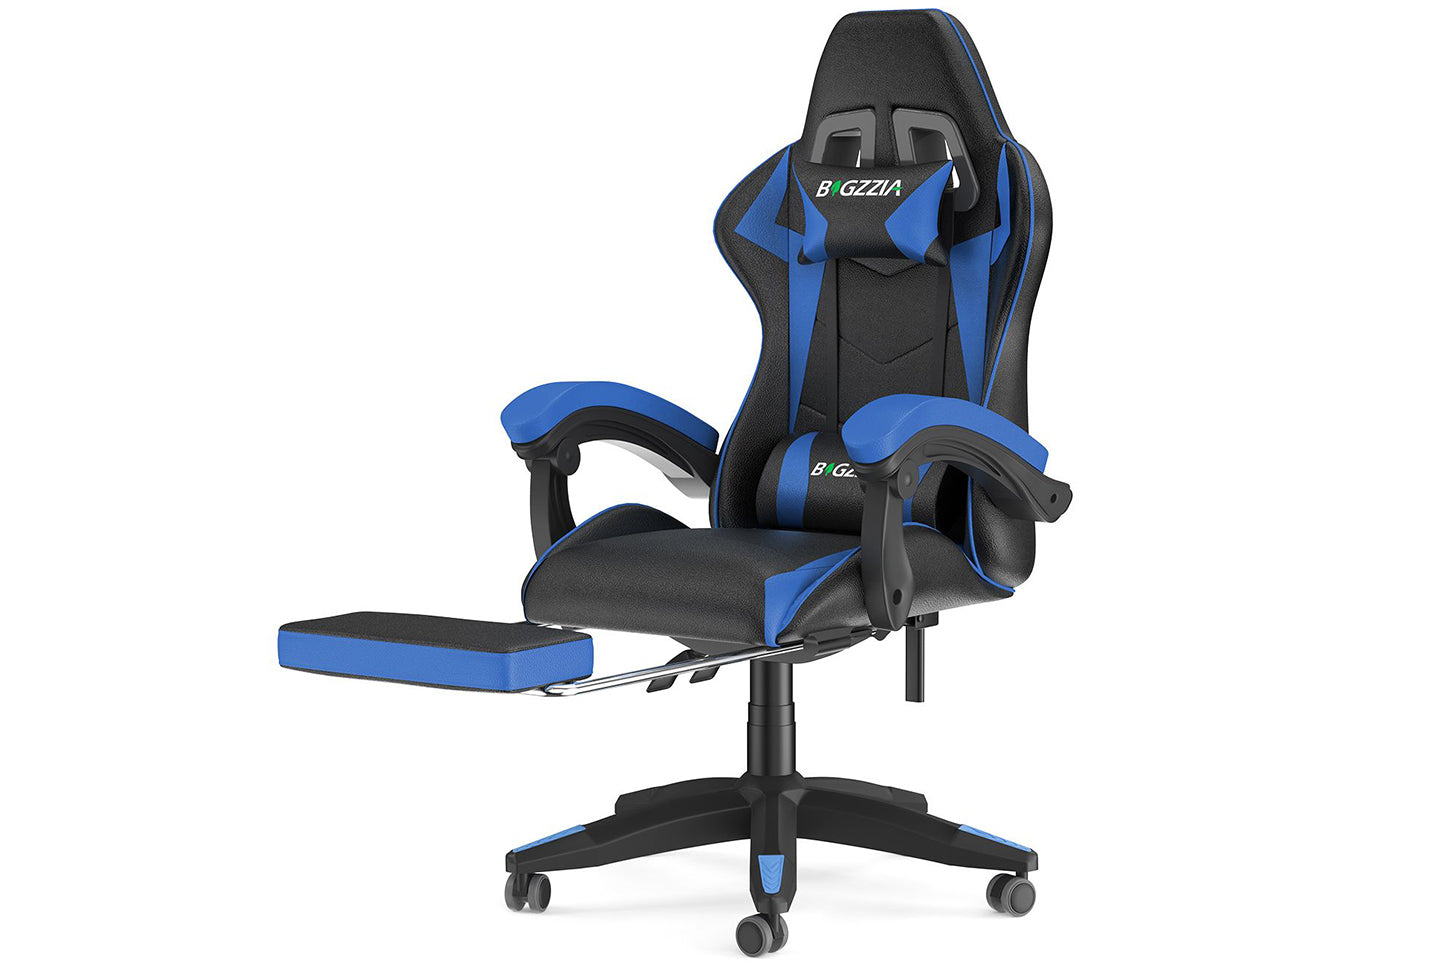 Ergonomic Gaming Chair 155¡ã Reclining Swivel Chair with Headrest Footrest Lumbar Support PU Leather Office Chair Black/Blue